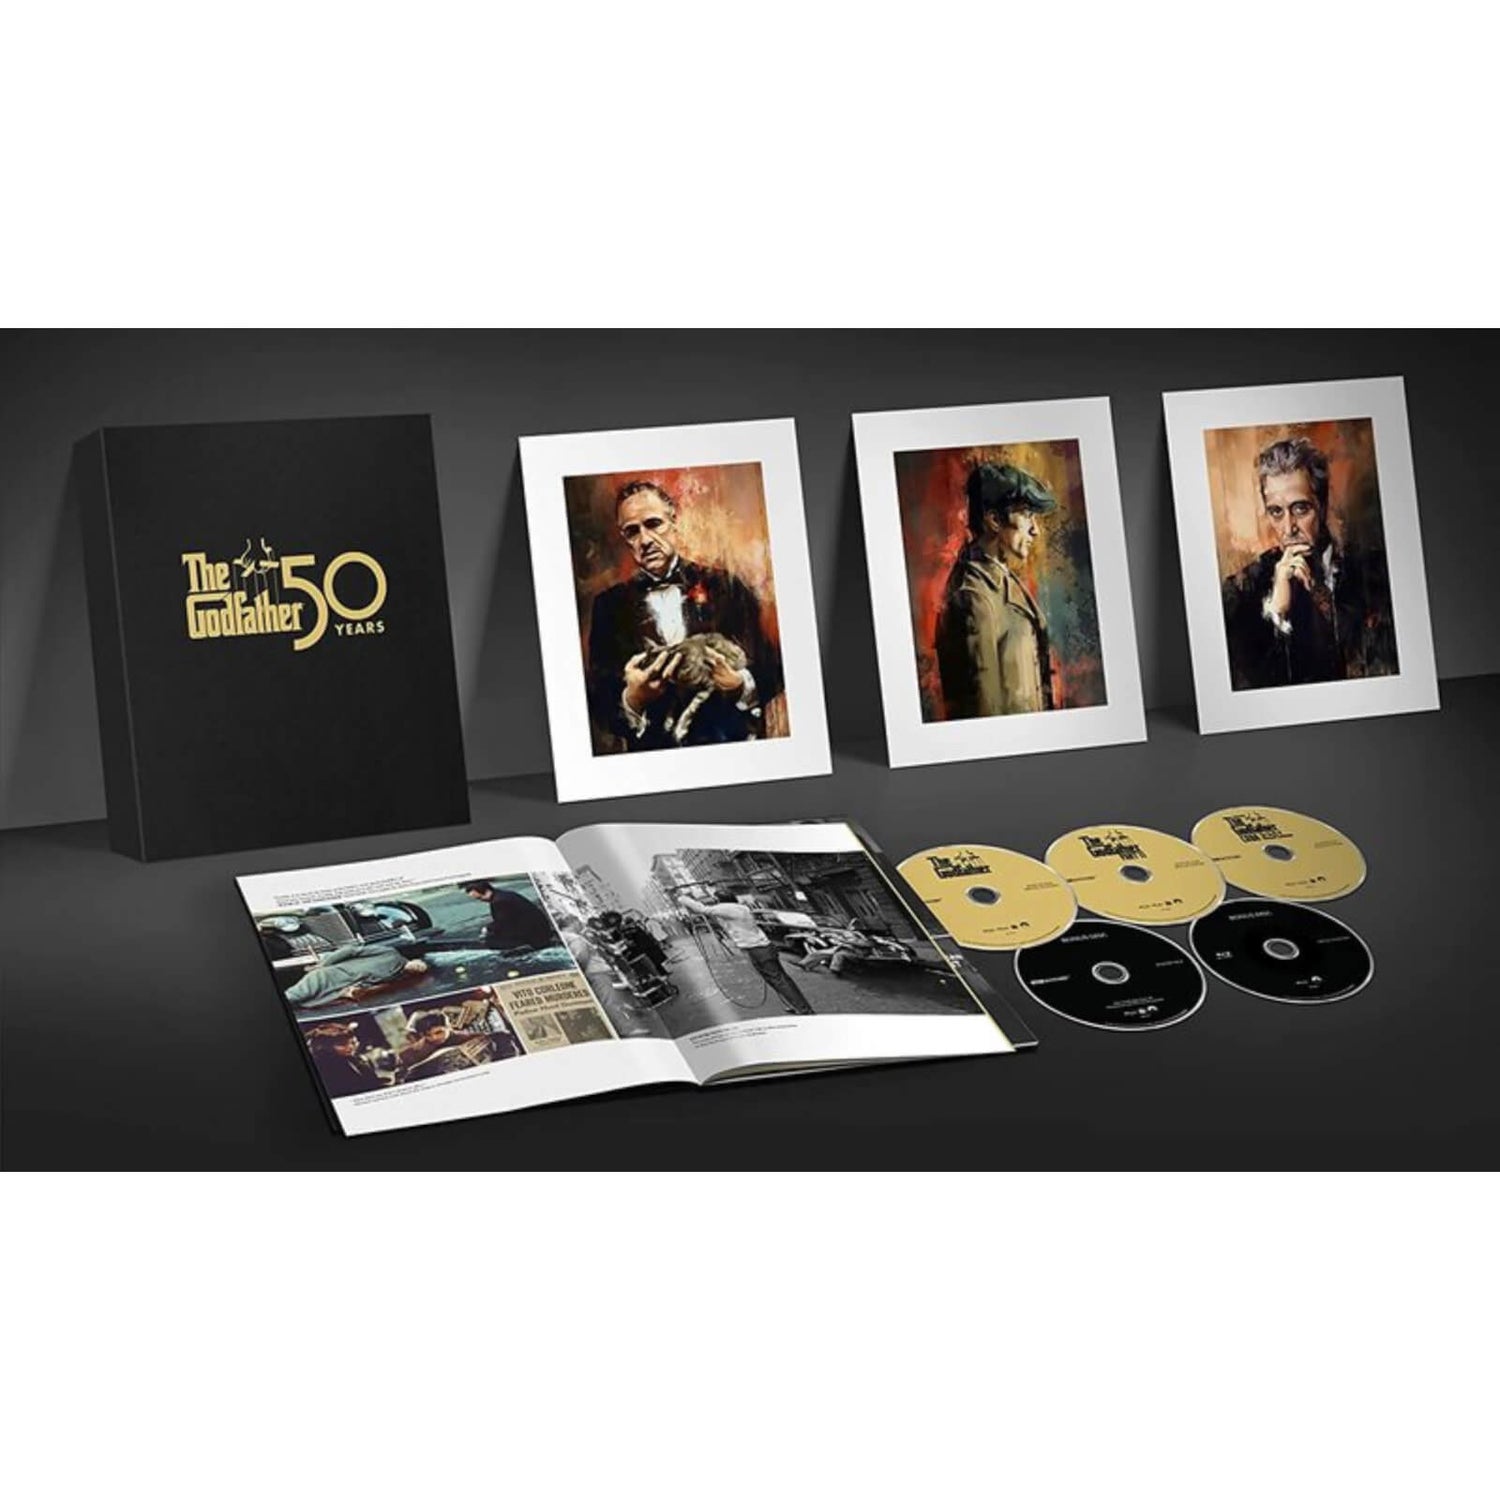 The Godfather Trilogy: 50 Years - 4K Ultra HD Box Set (Includes Blu-ray)